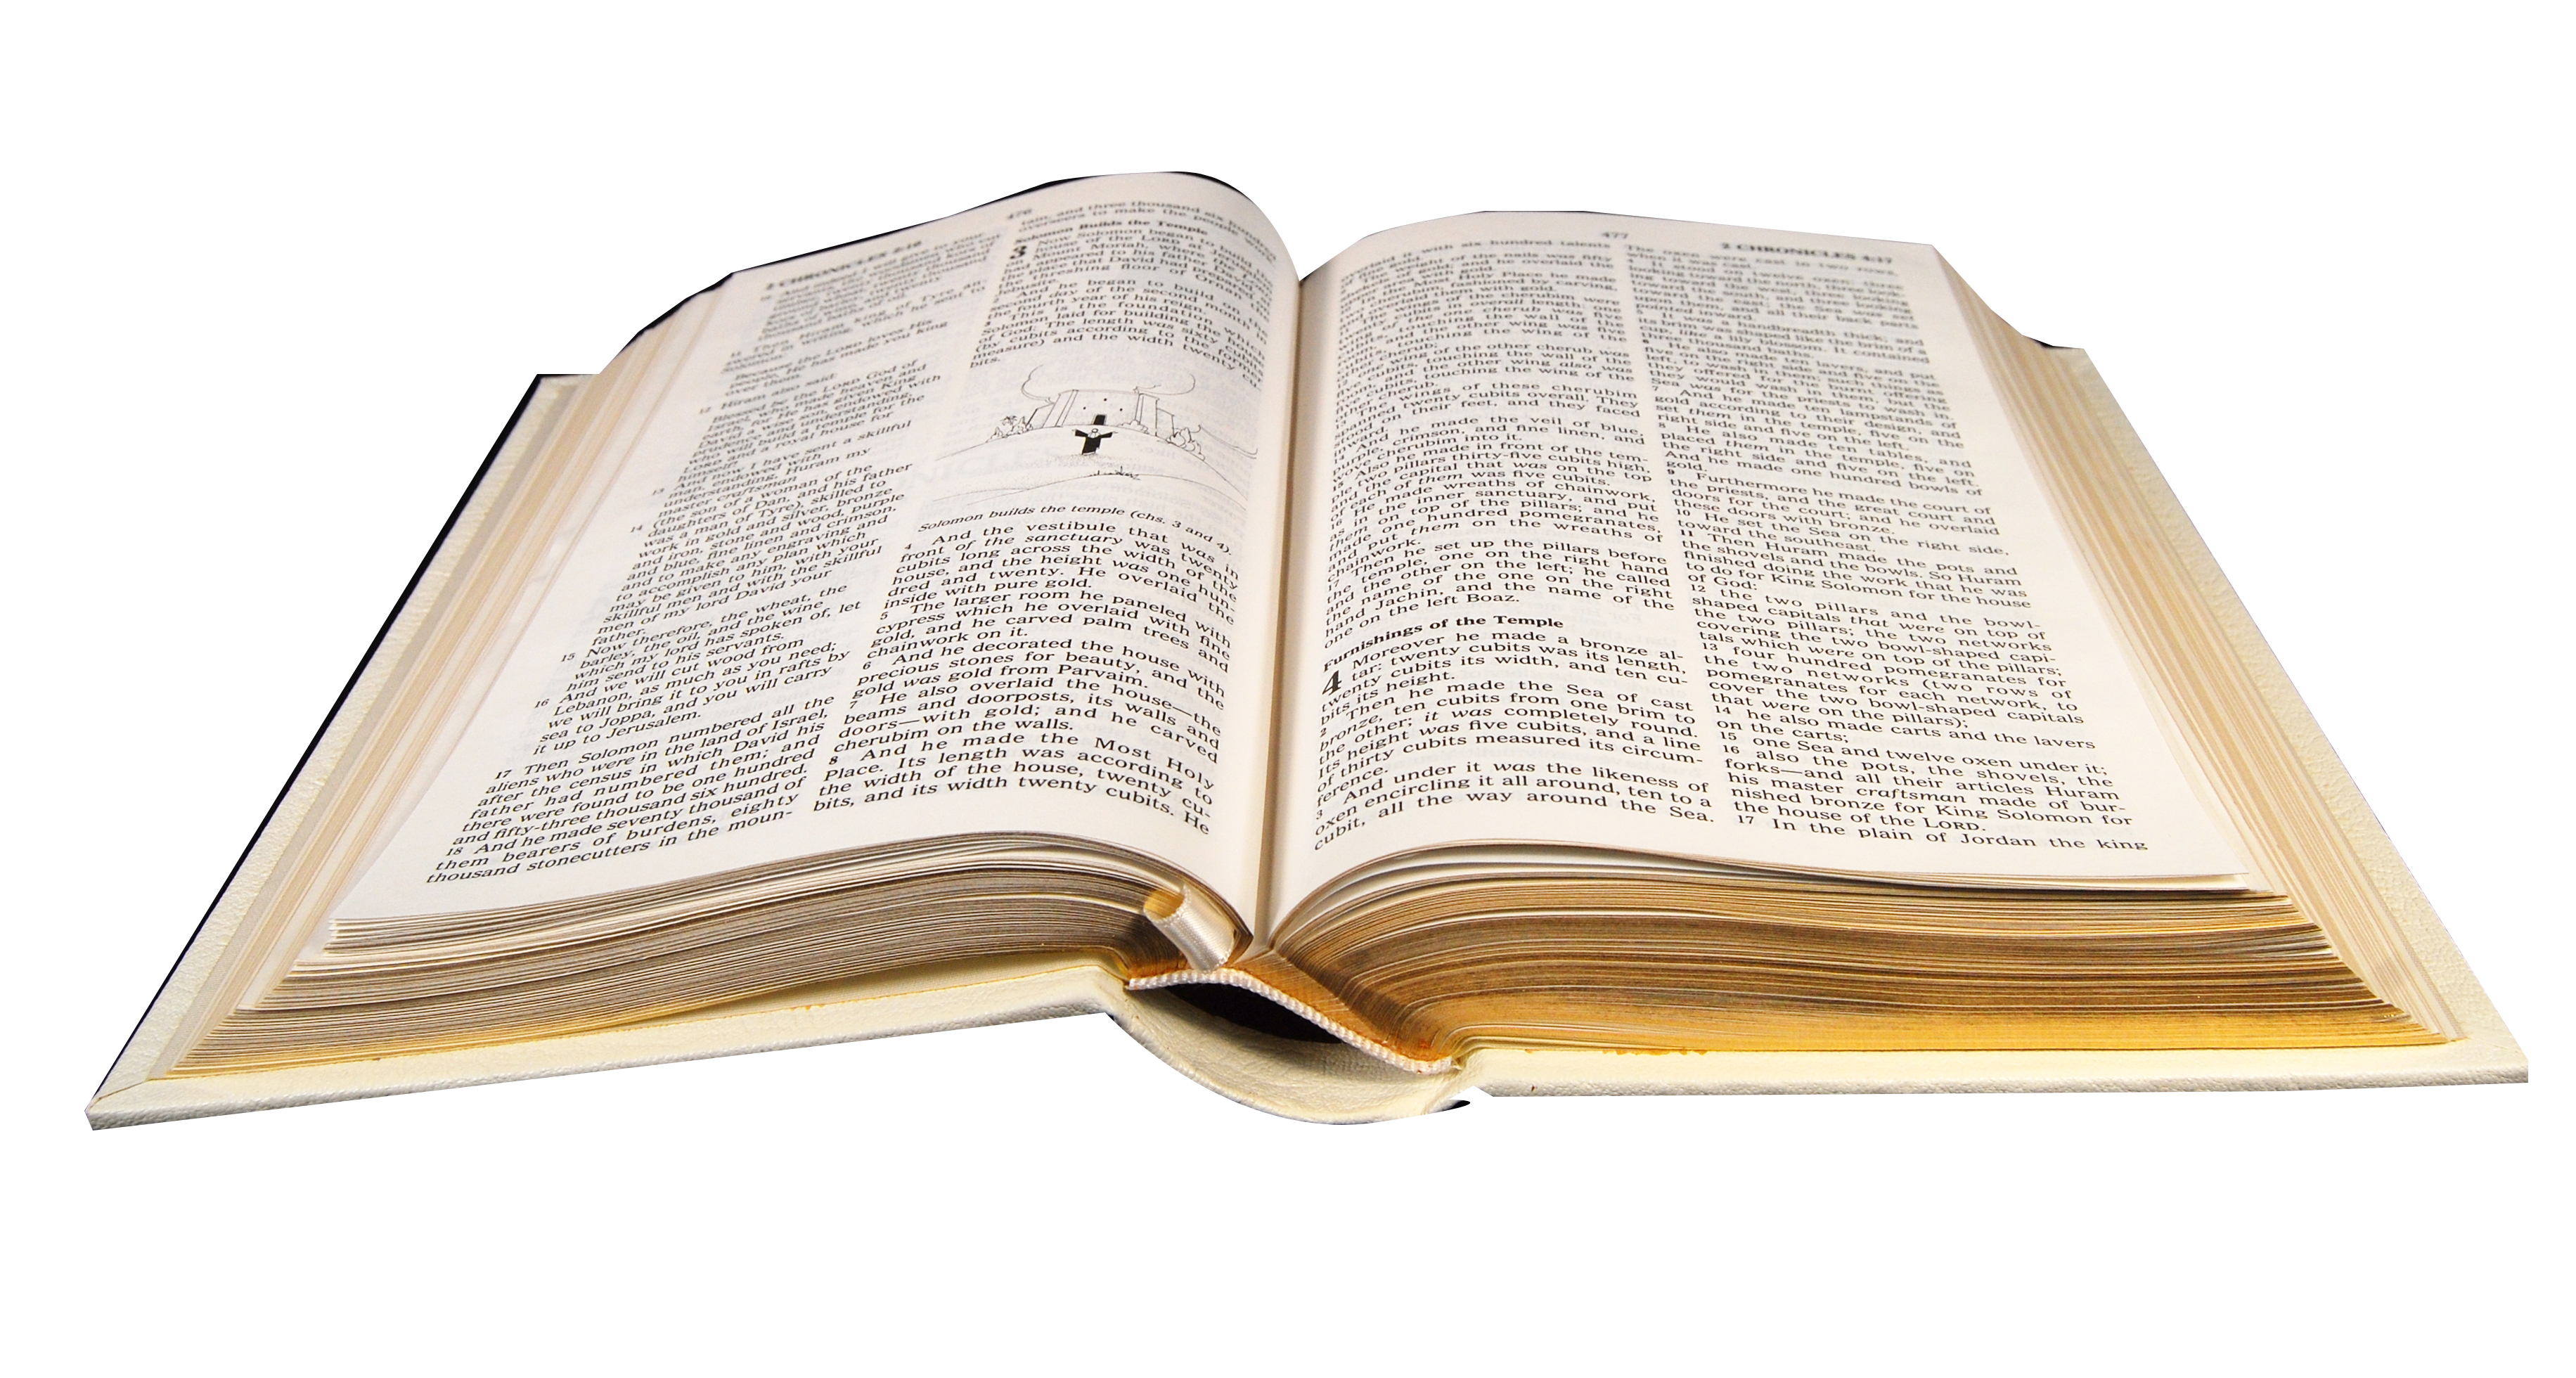 Holy Bible Png